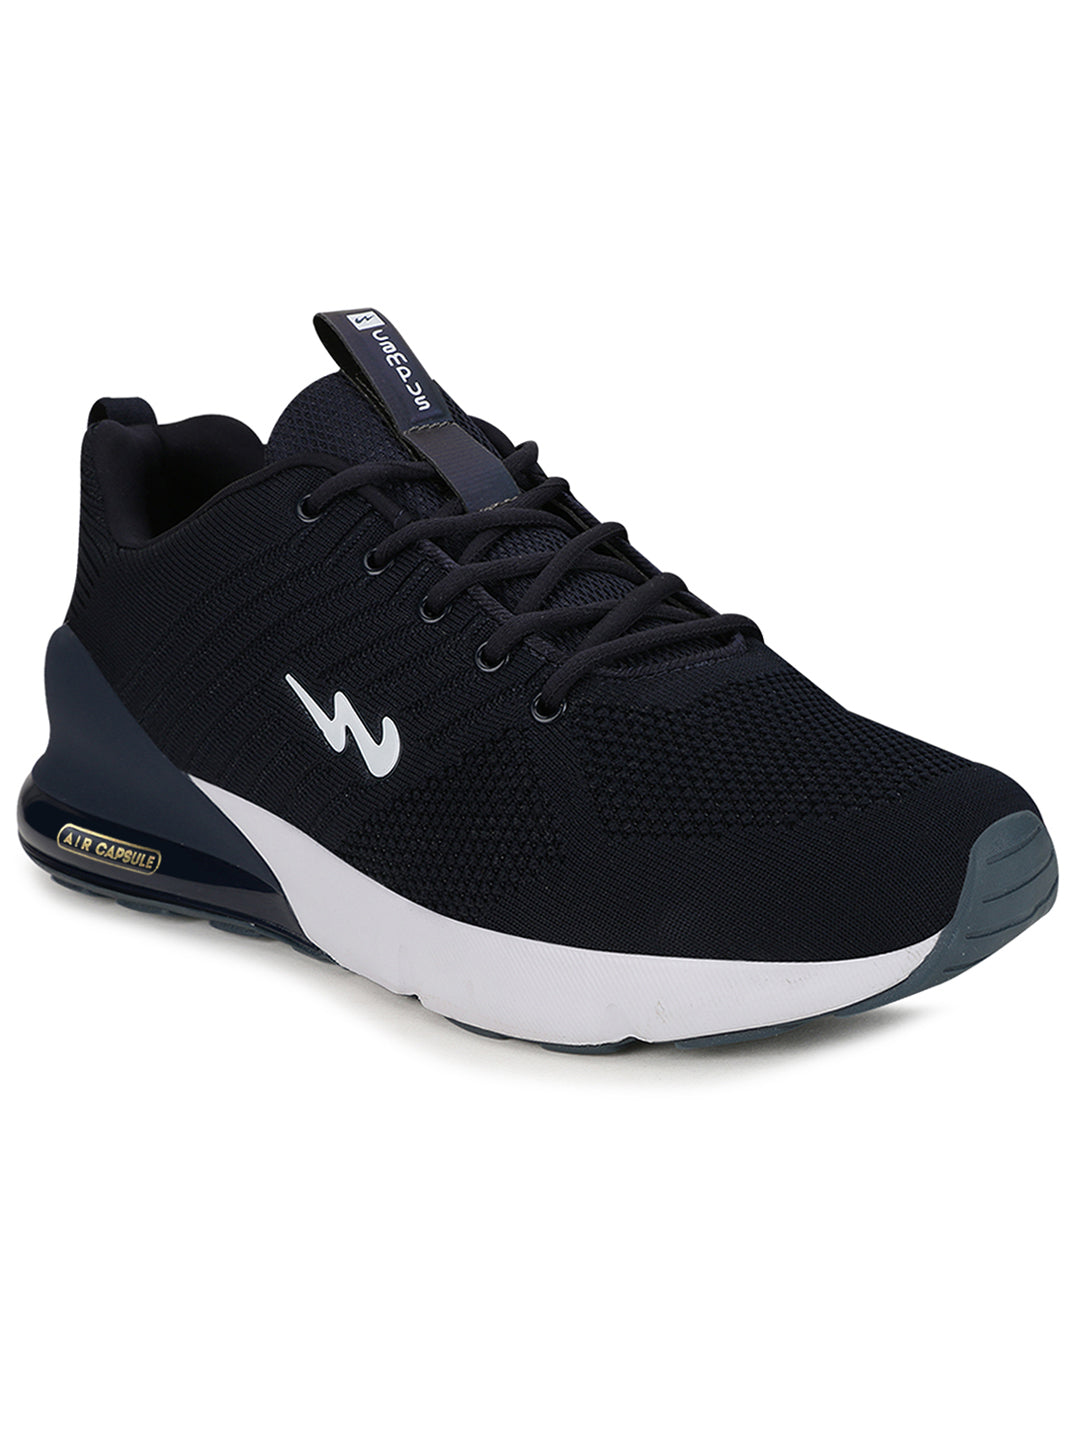 MIKE N Blue Men's Running Shoes